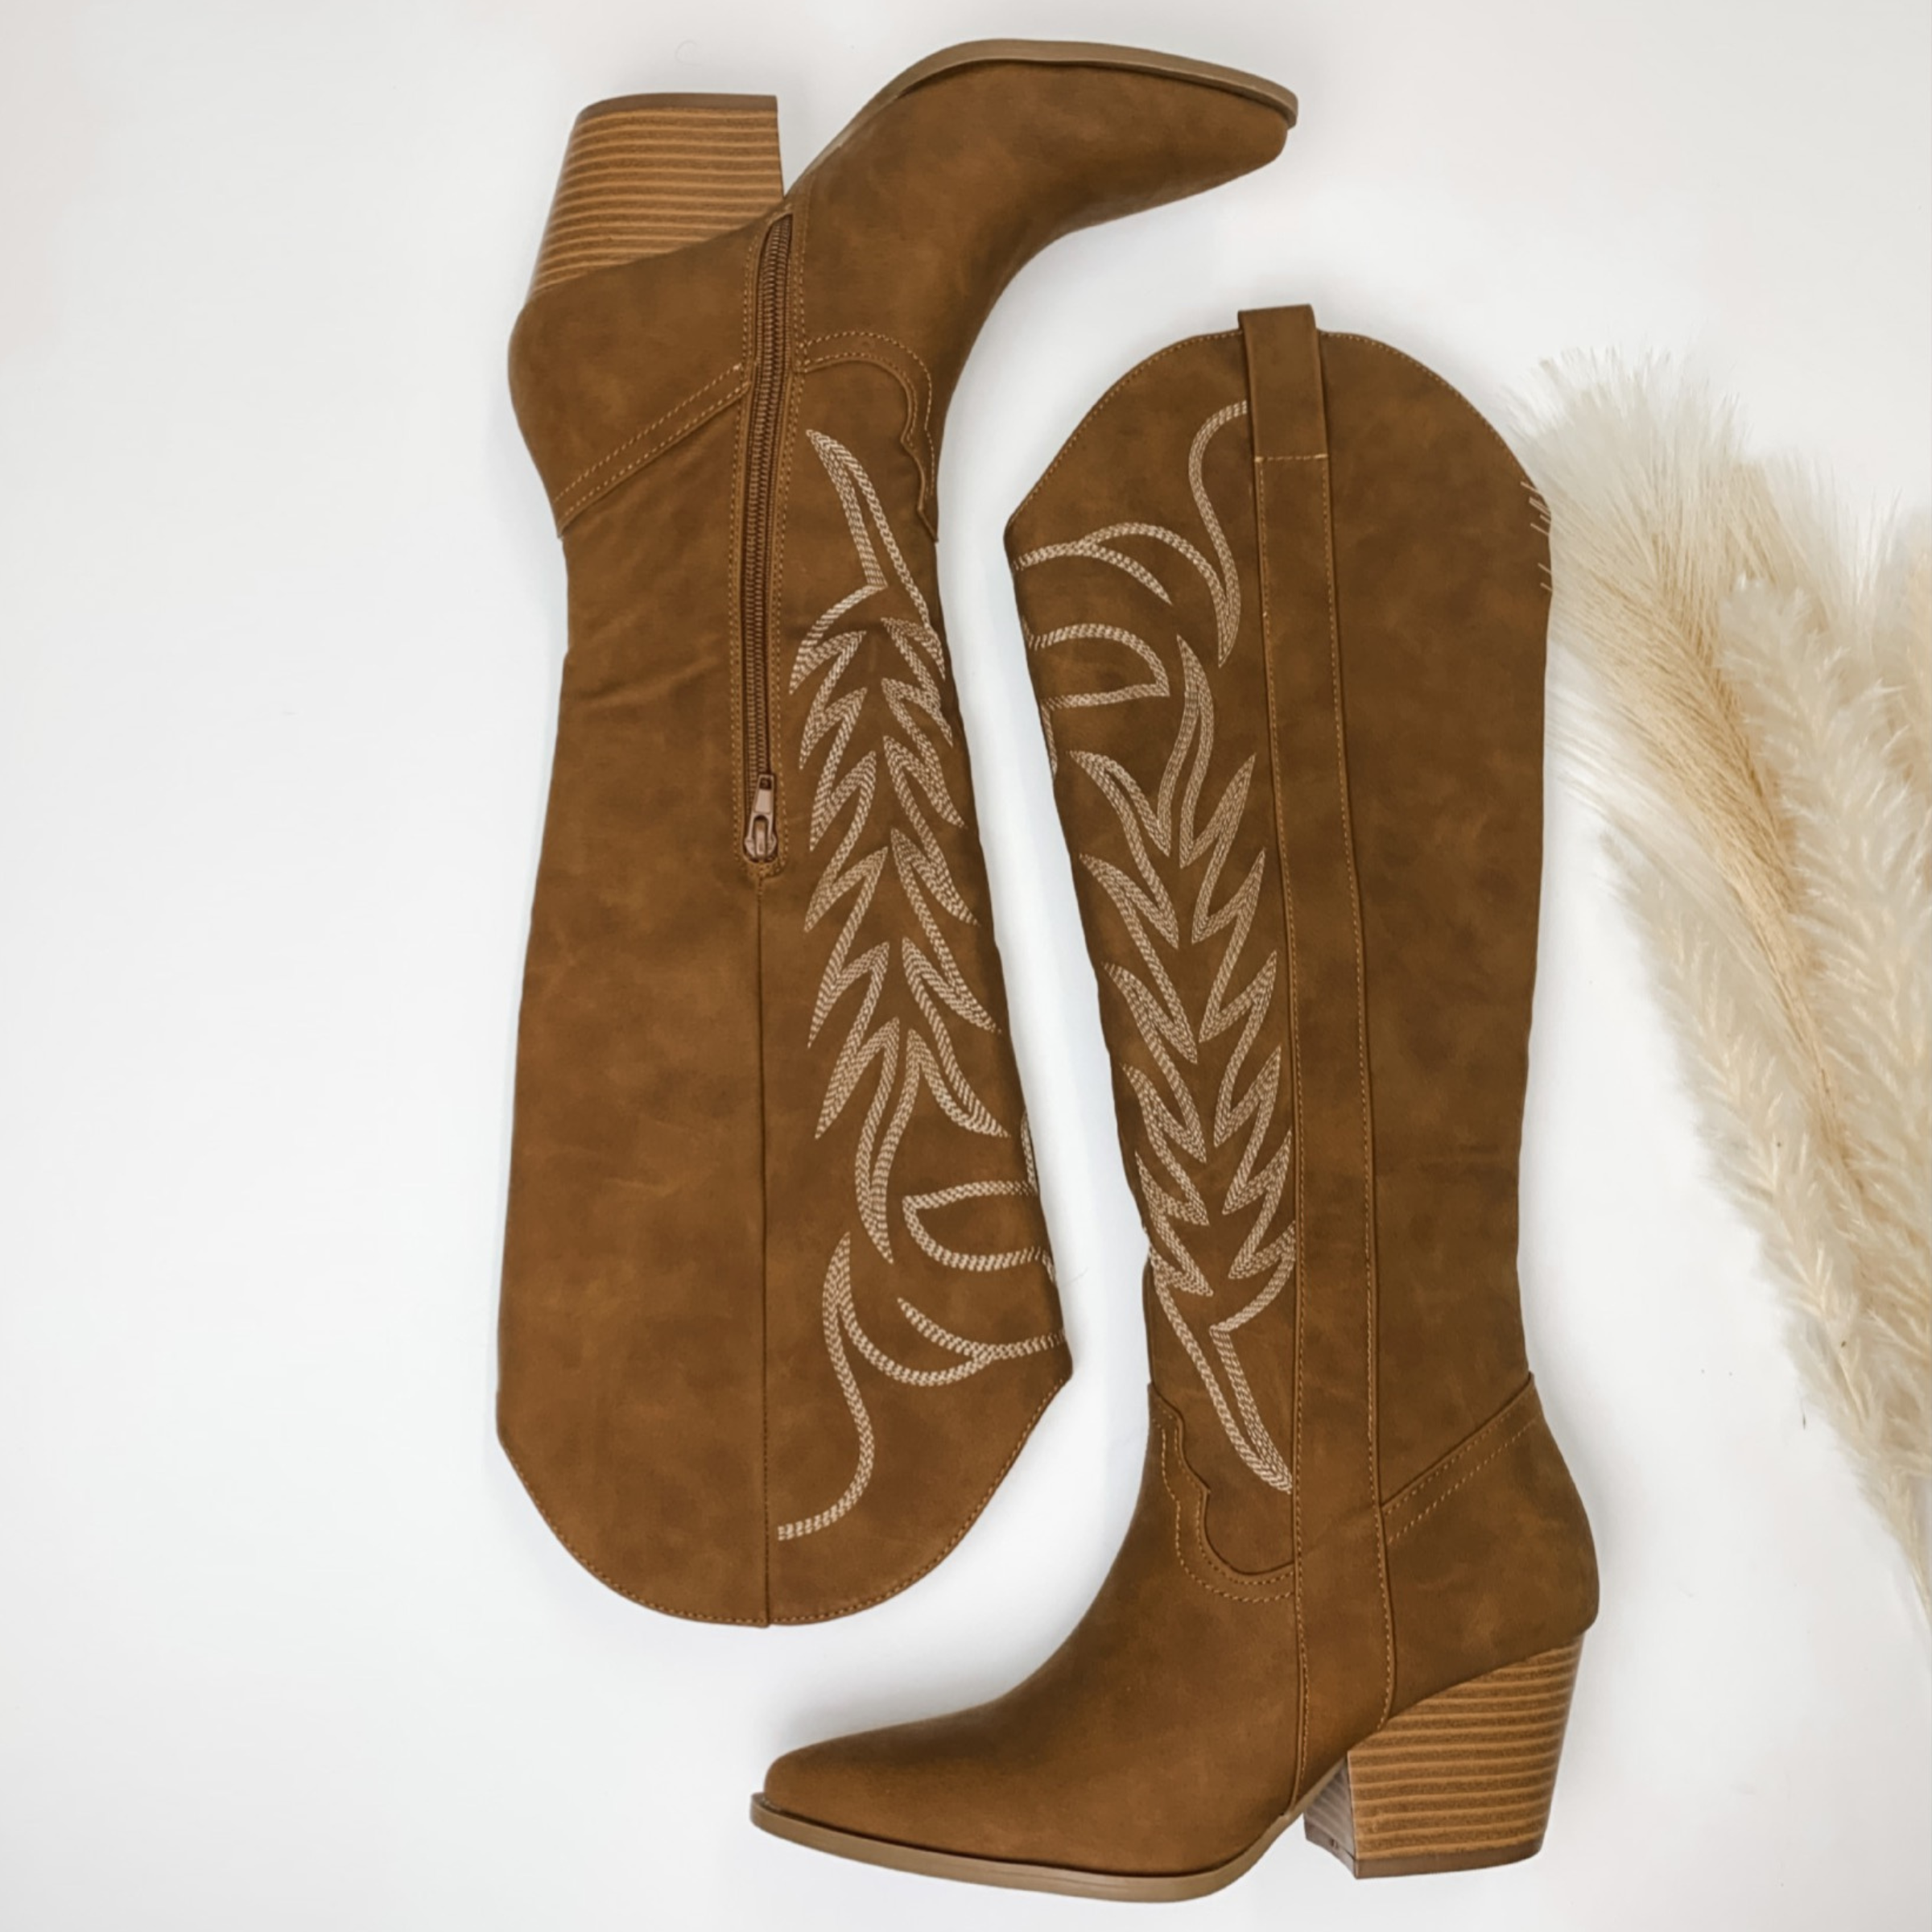 Rodeo Ready Knee High Western Stitch Boots in Camel Brown - Giddy Up Glamour Boutique